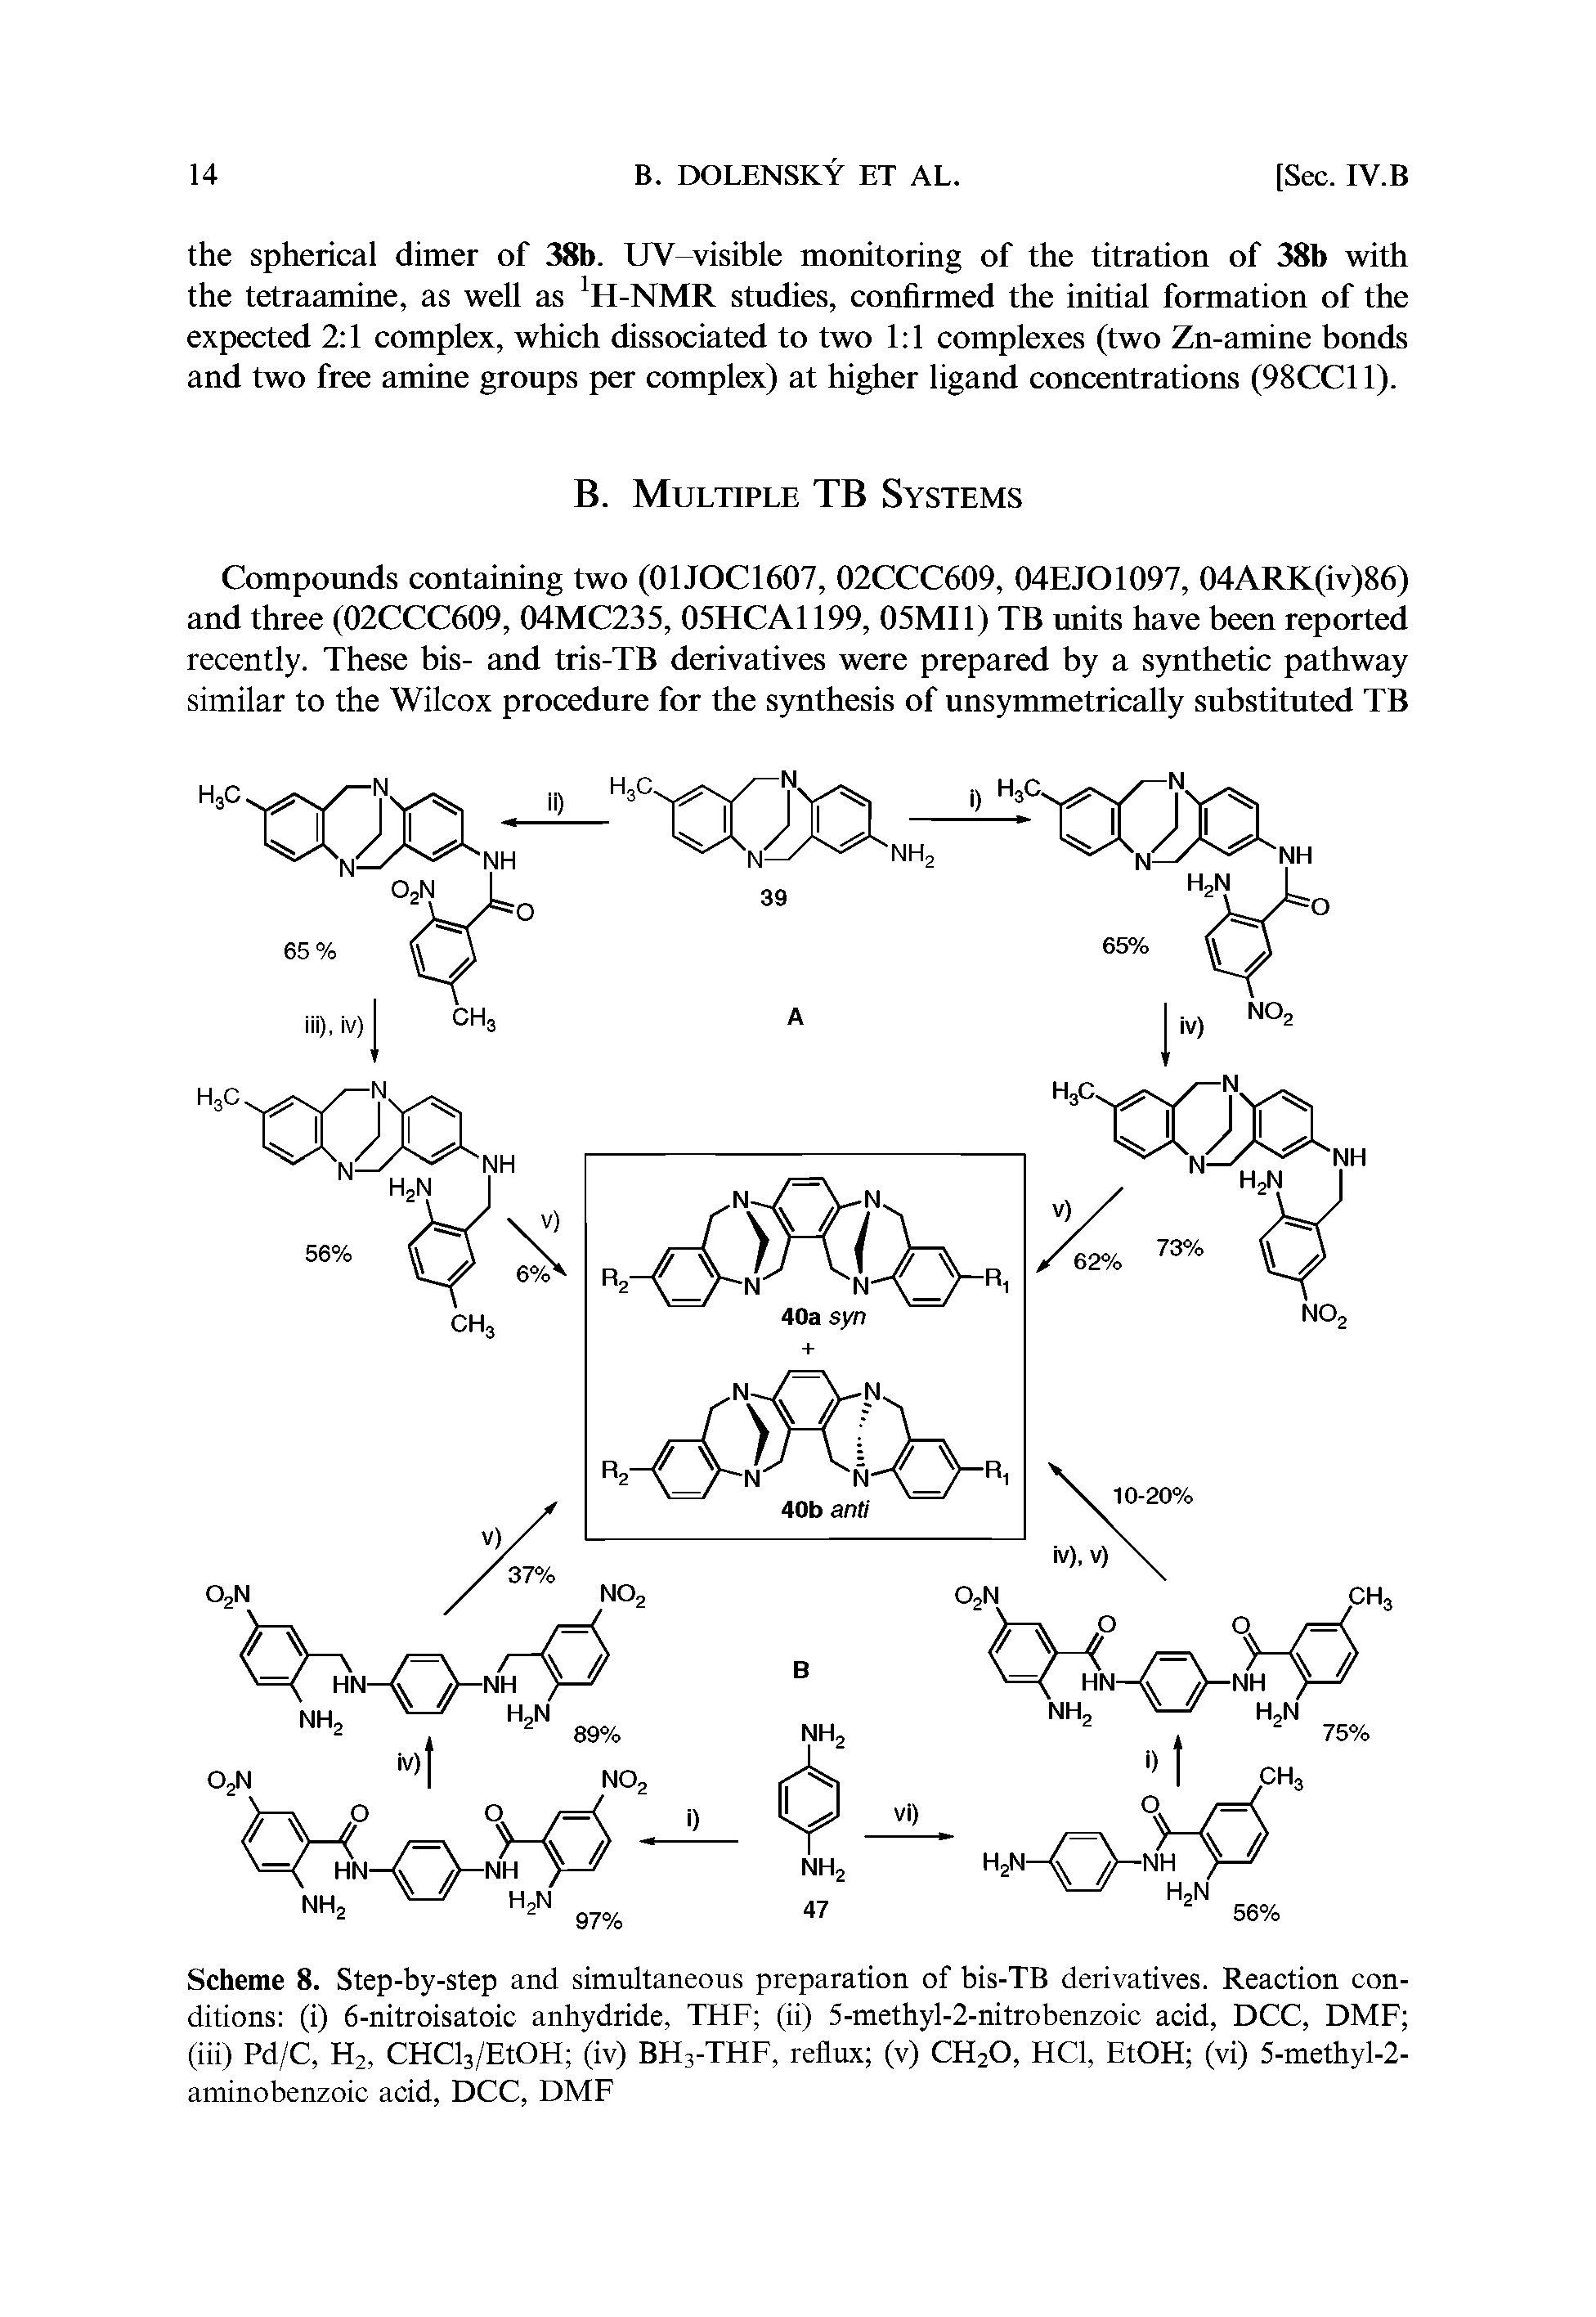 Scheme 8. Step-by-step and simultaneous preparation of bis-TB derivatives. Reaction conditions (i) 6-nitroisatoic anhydride, THF (ii) 5-methyl-2-nitrobenzoic acid, DCC, DMF (iii) Pd/C, H2, CHCl3/EtOH (iv) BH3-THF, reflux (v) CH20, HC1, EtOH (vi) 5-methyl-2-aminobenzoic acid, DCC, DMF...